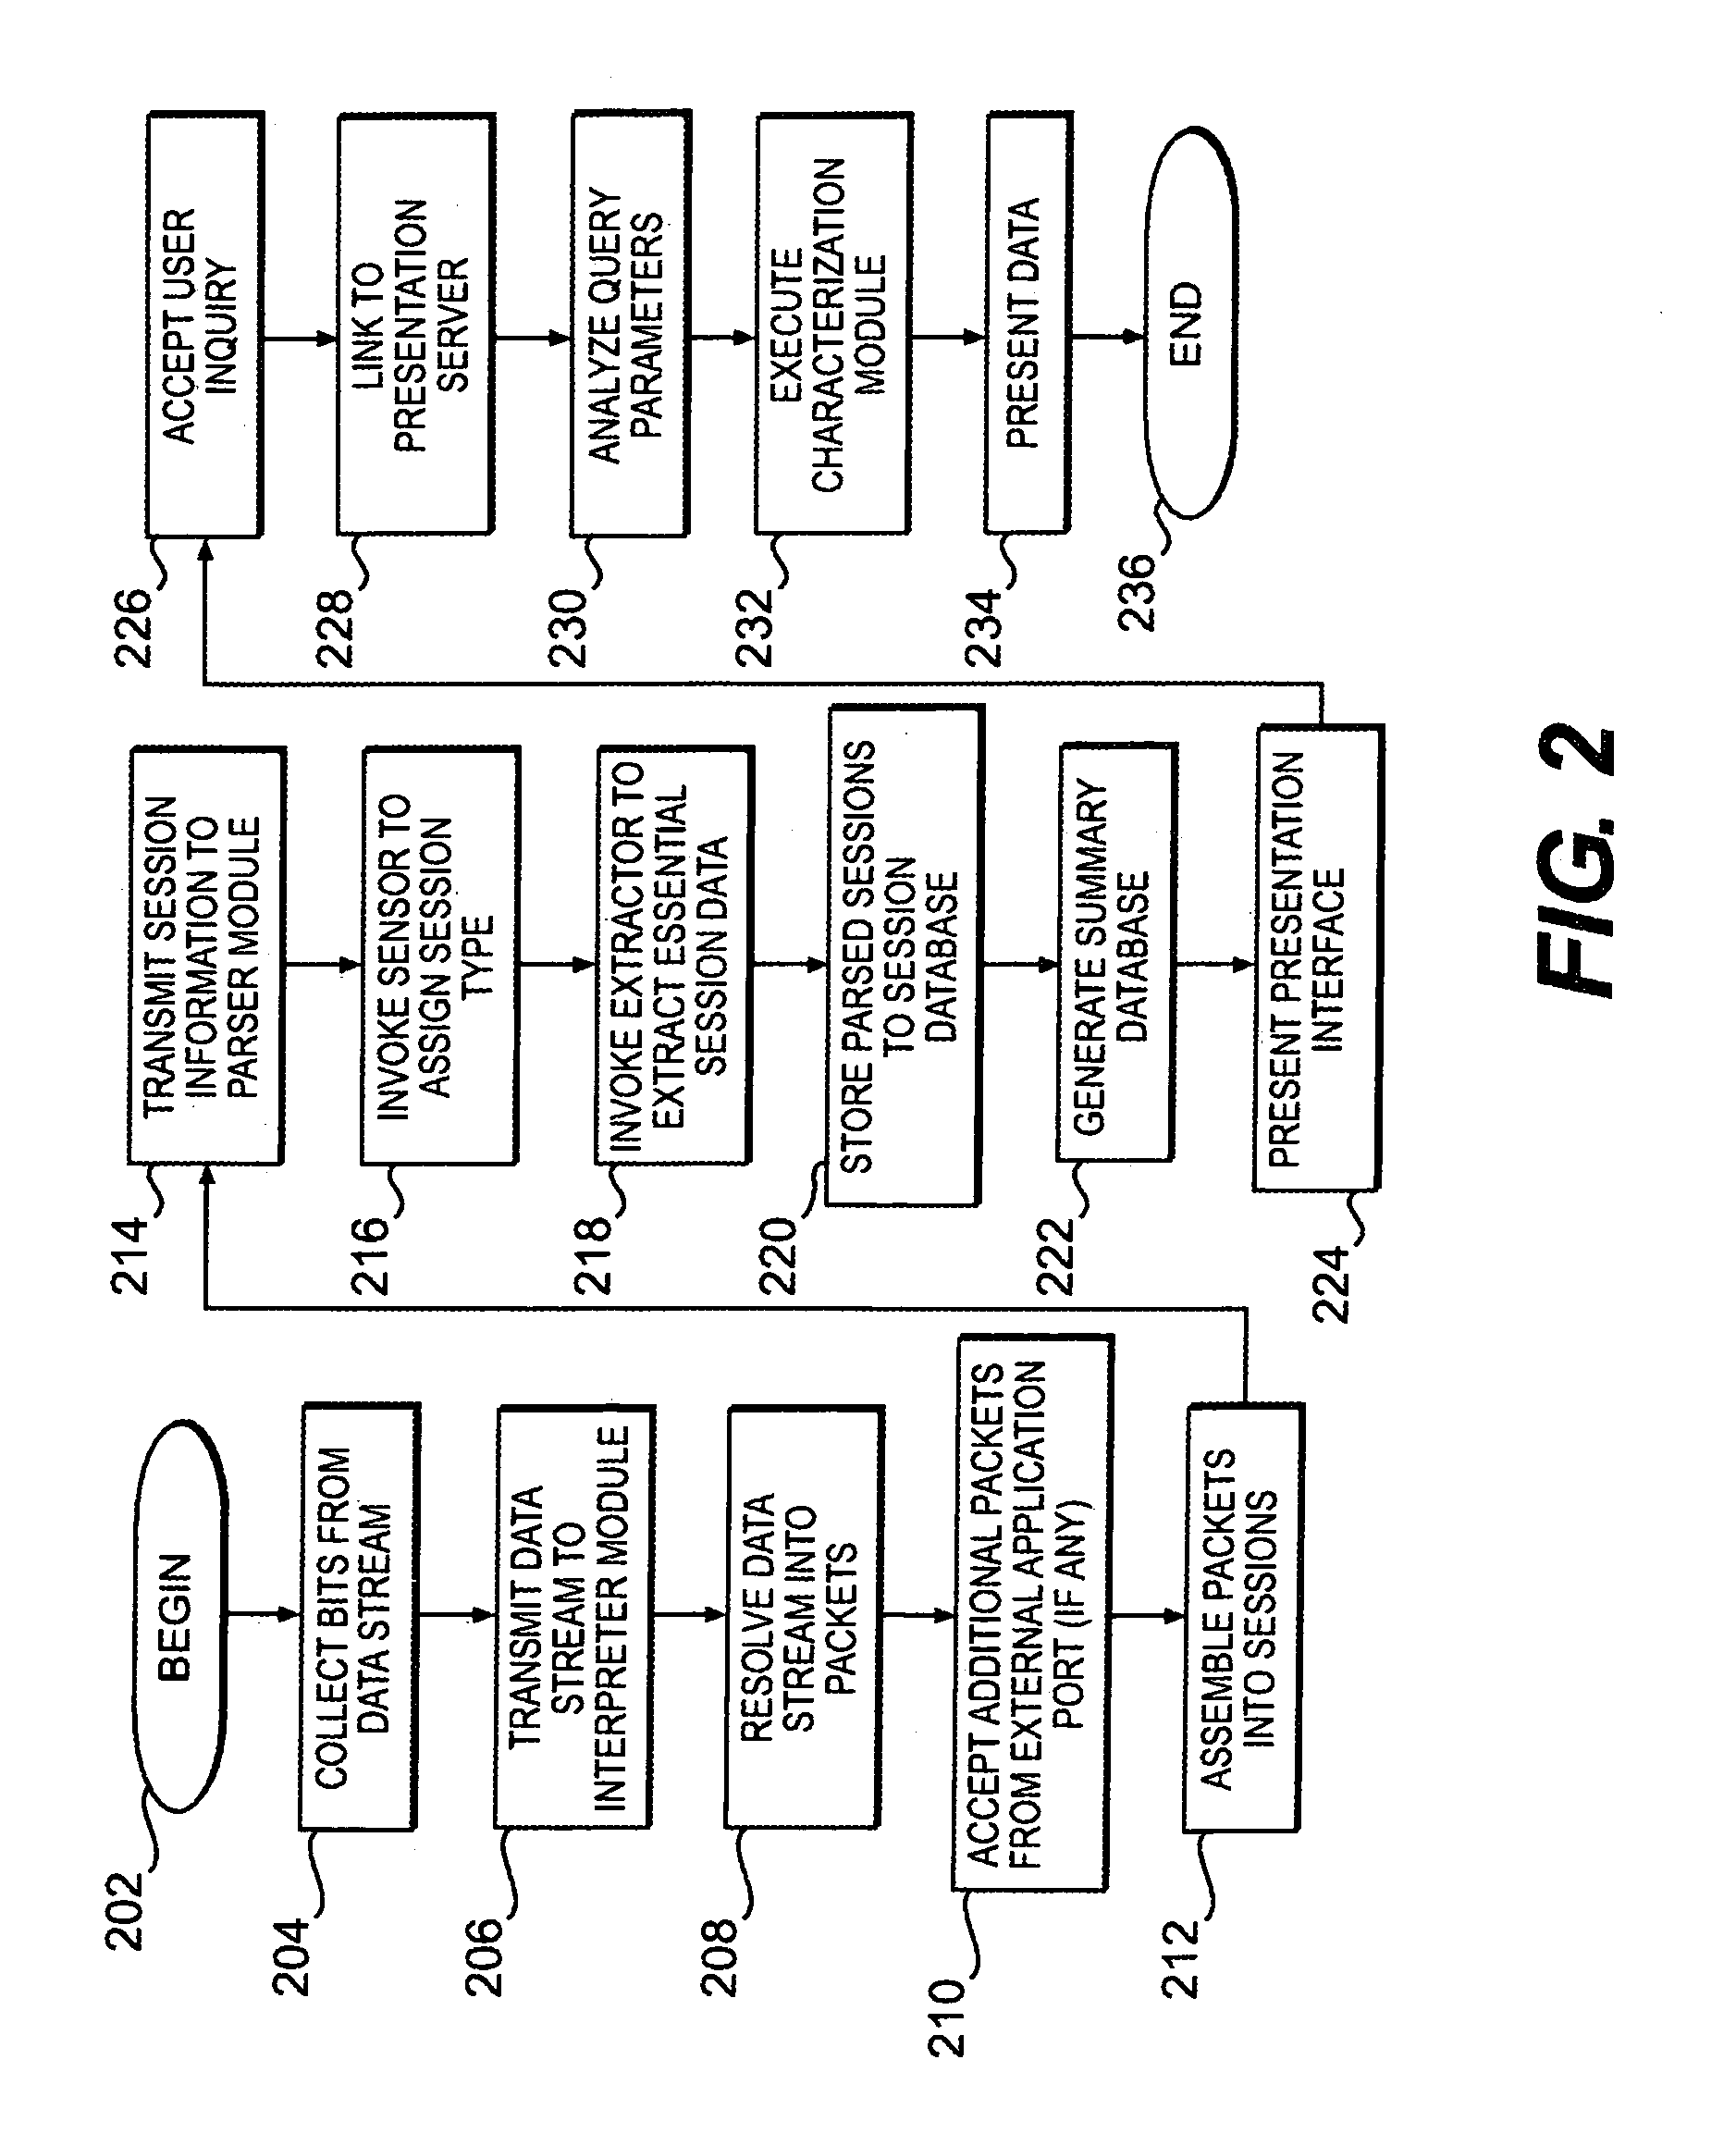 System and method for network security